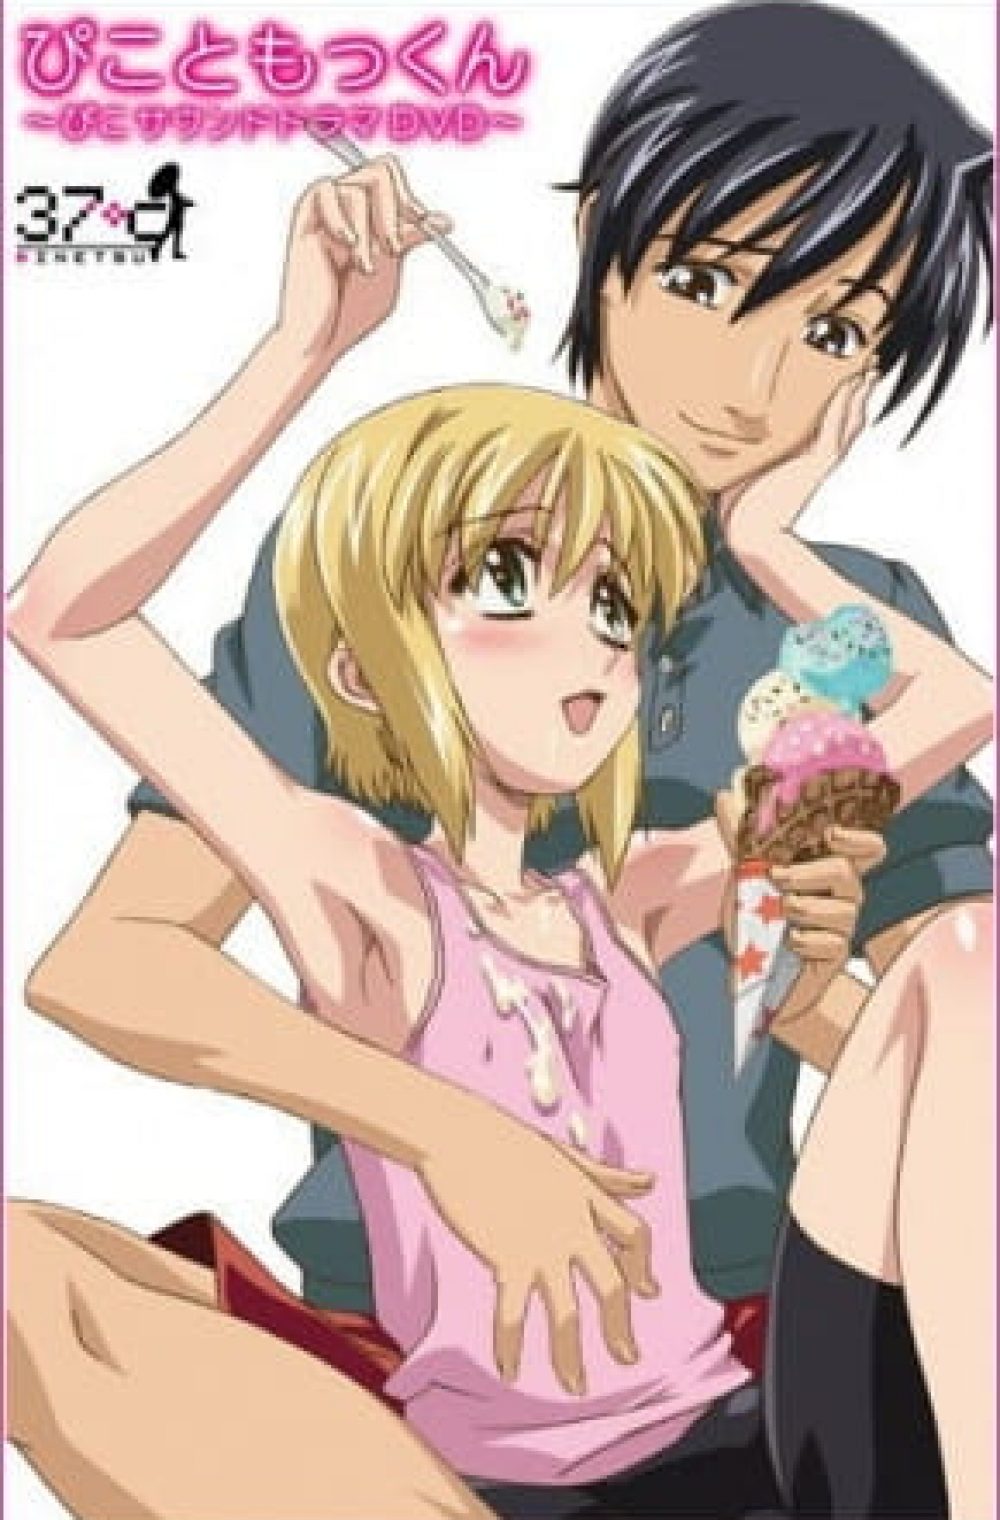 brent mcneil recommends Boku No Pico Online